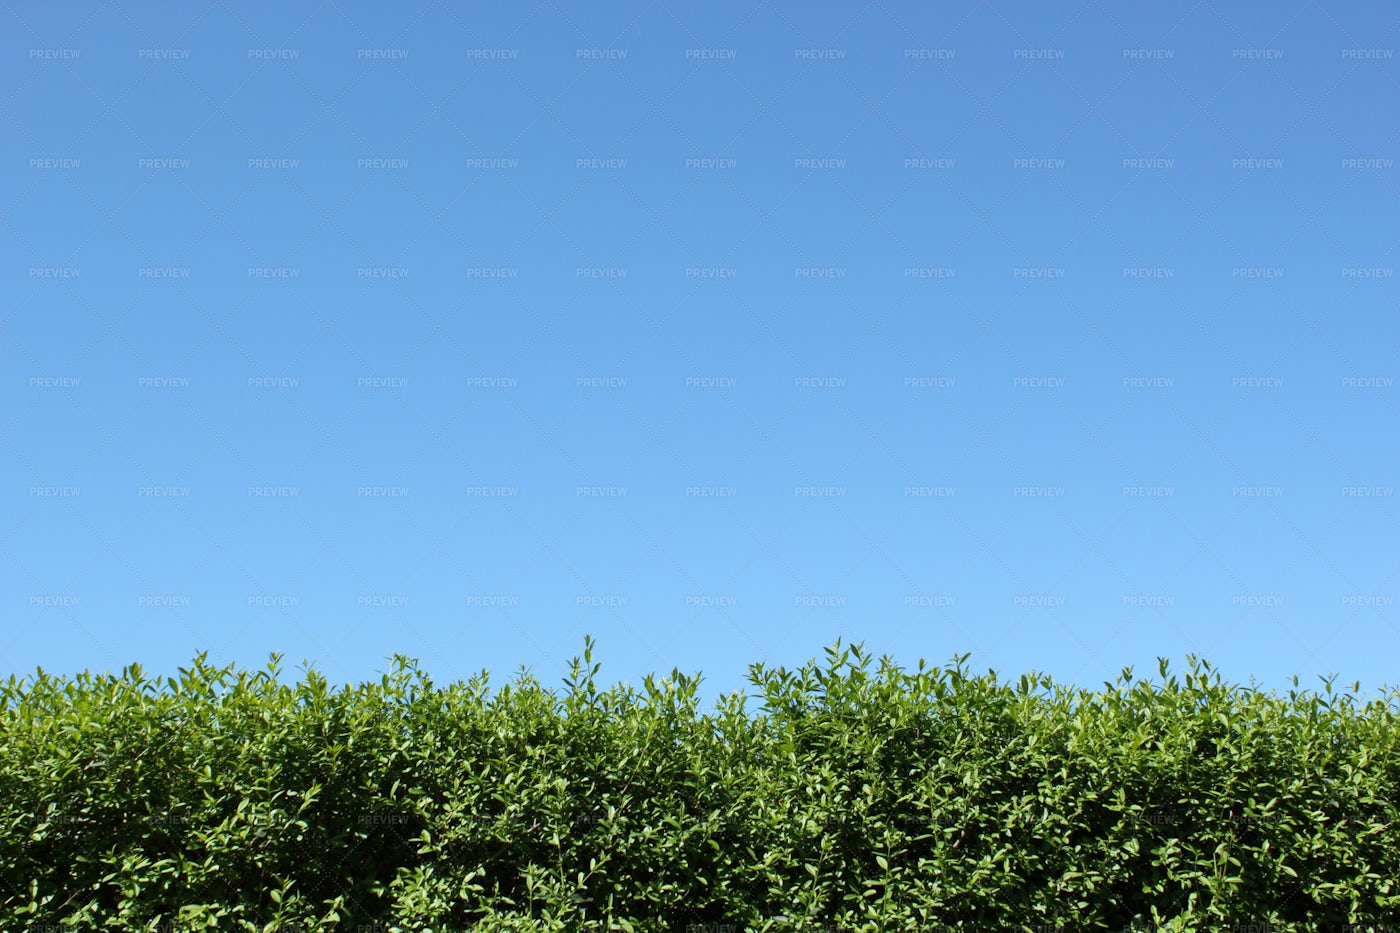 Green Hedge And Sky: Stock Photos